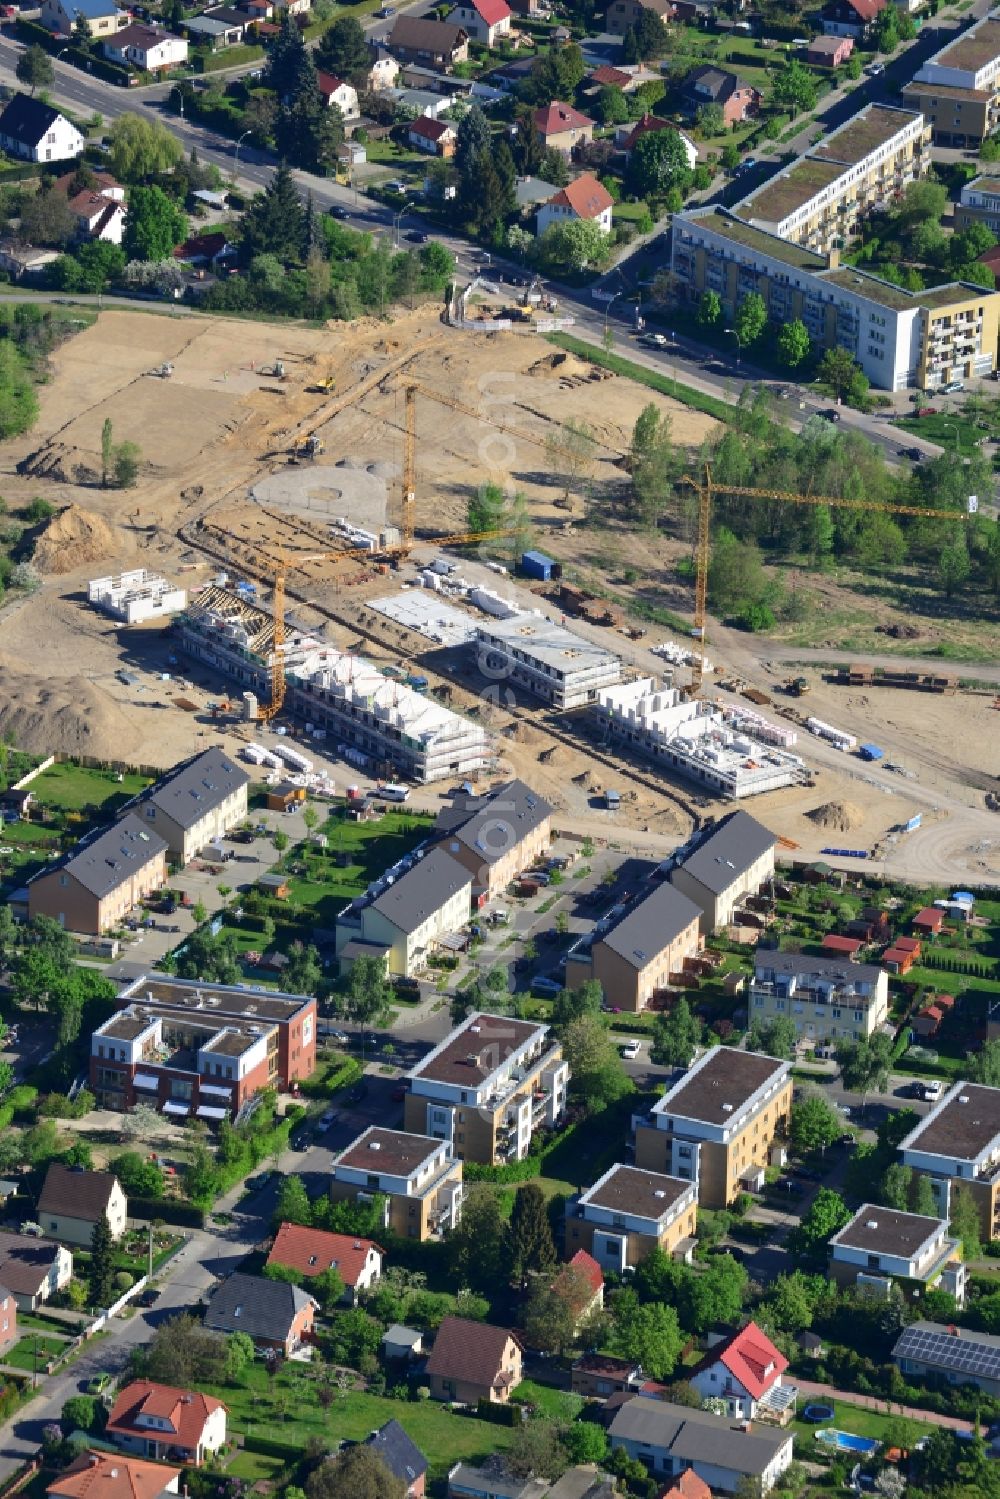 Berlin from above - Construction site to build a new residential complex on Wegedornstrasse in the Altglienicke part of the district of Treptow-Koepenick in Berlin in Germany. The project consists of single family homes and semi-detached houses. It is being run by NCC AB